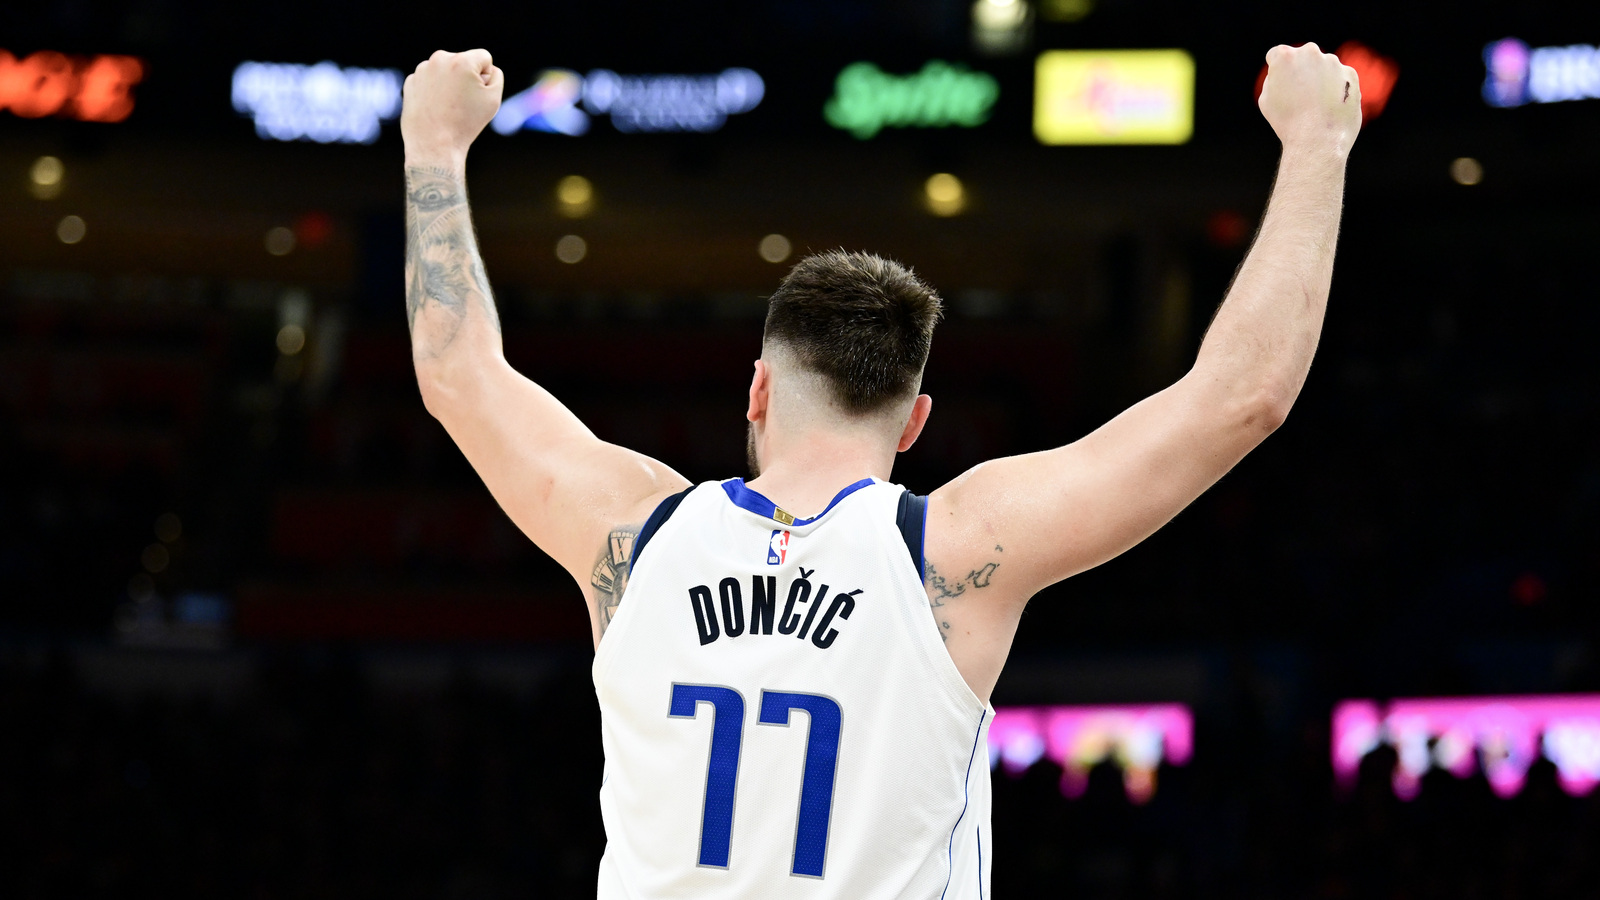 The 'Most triple-doubles in the postseason' quiz